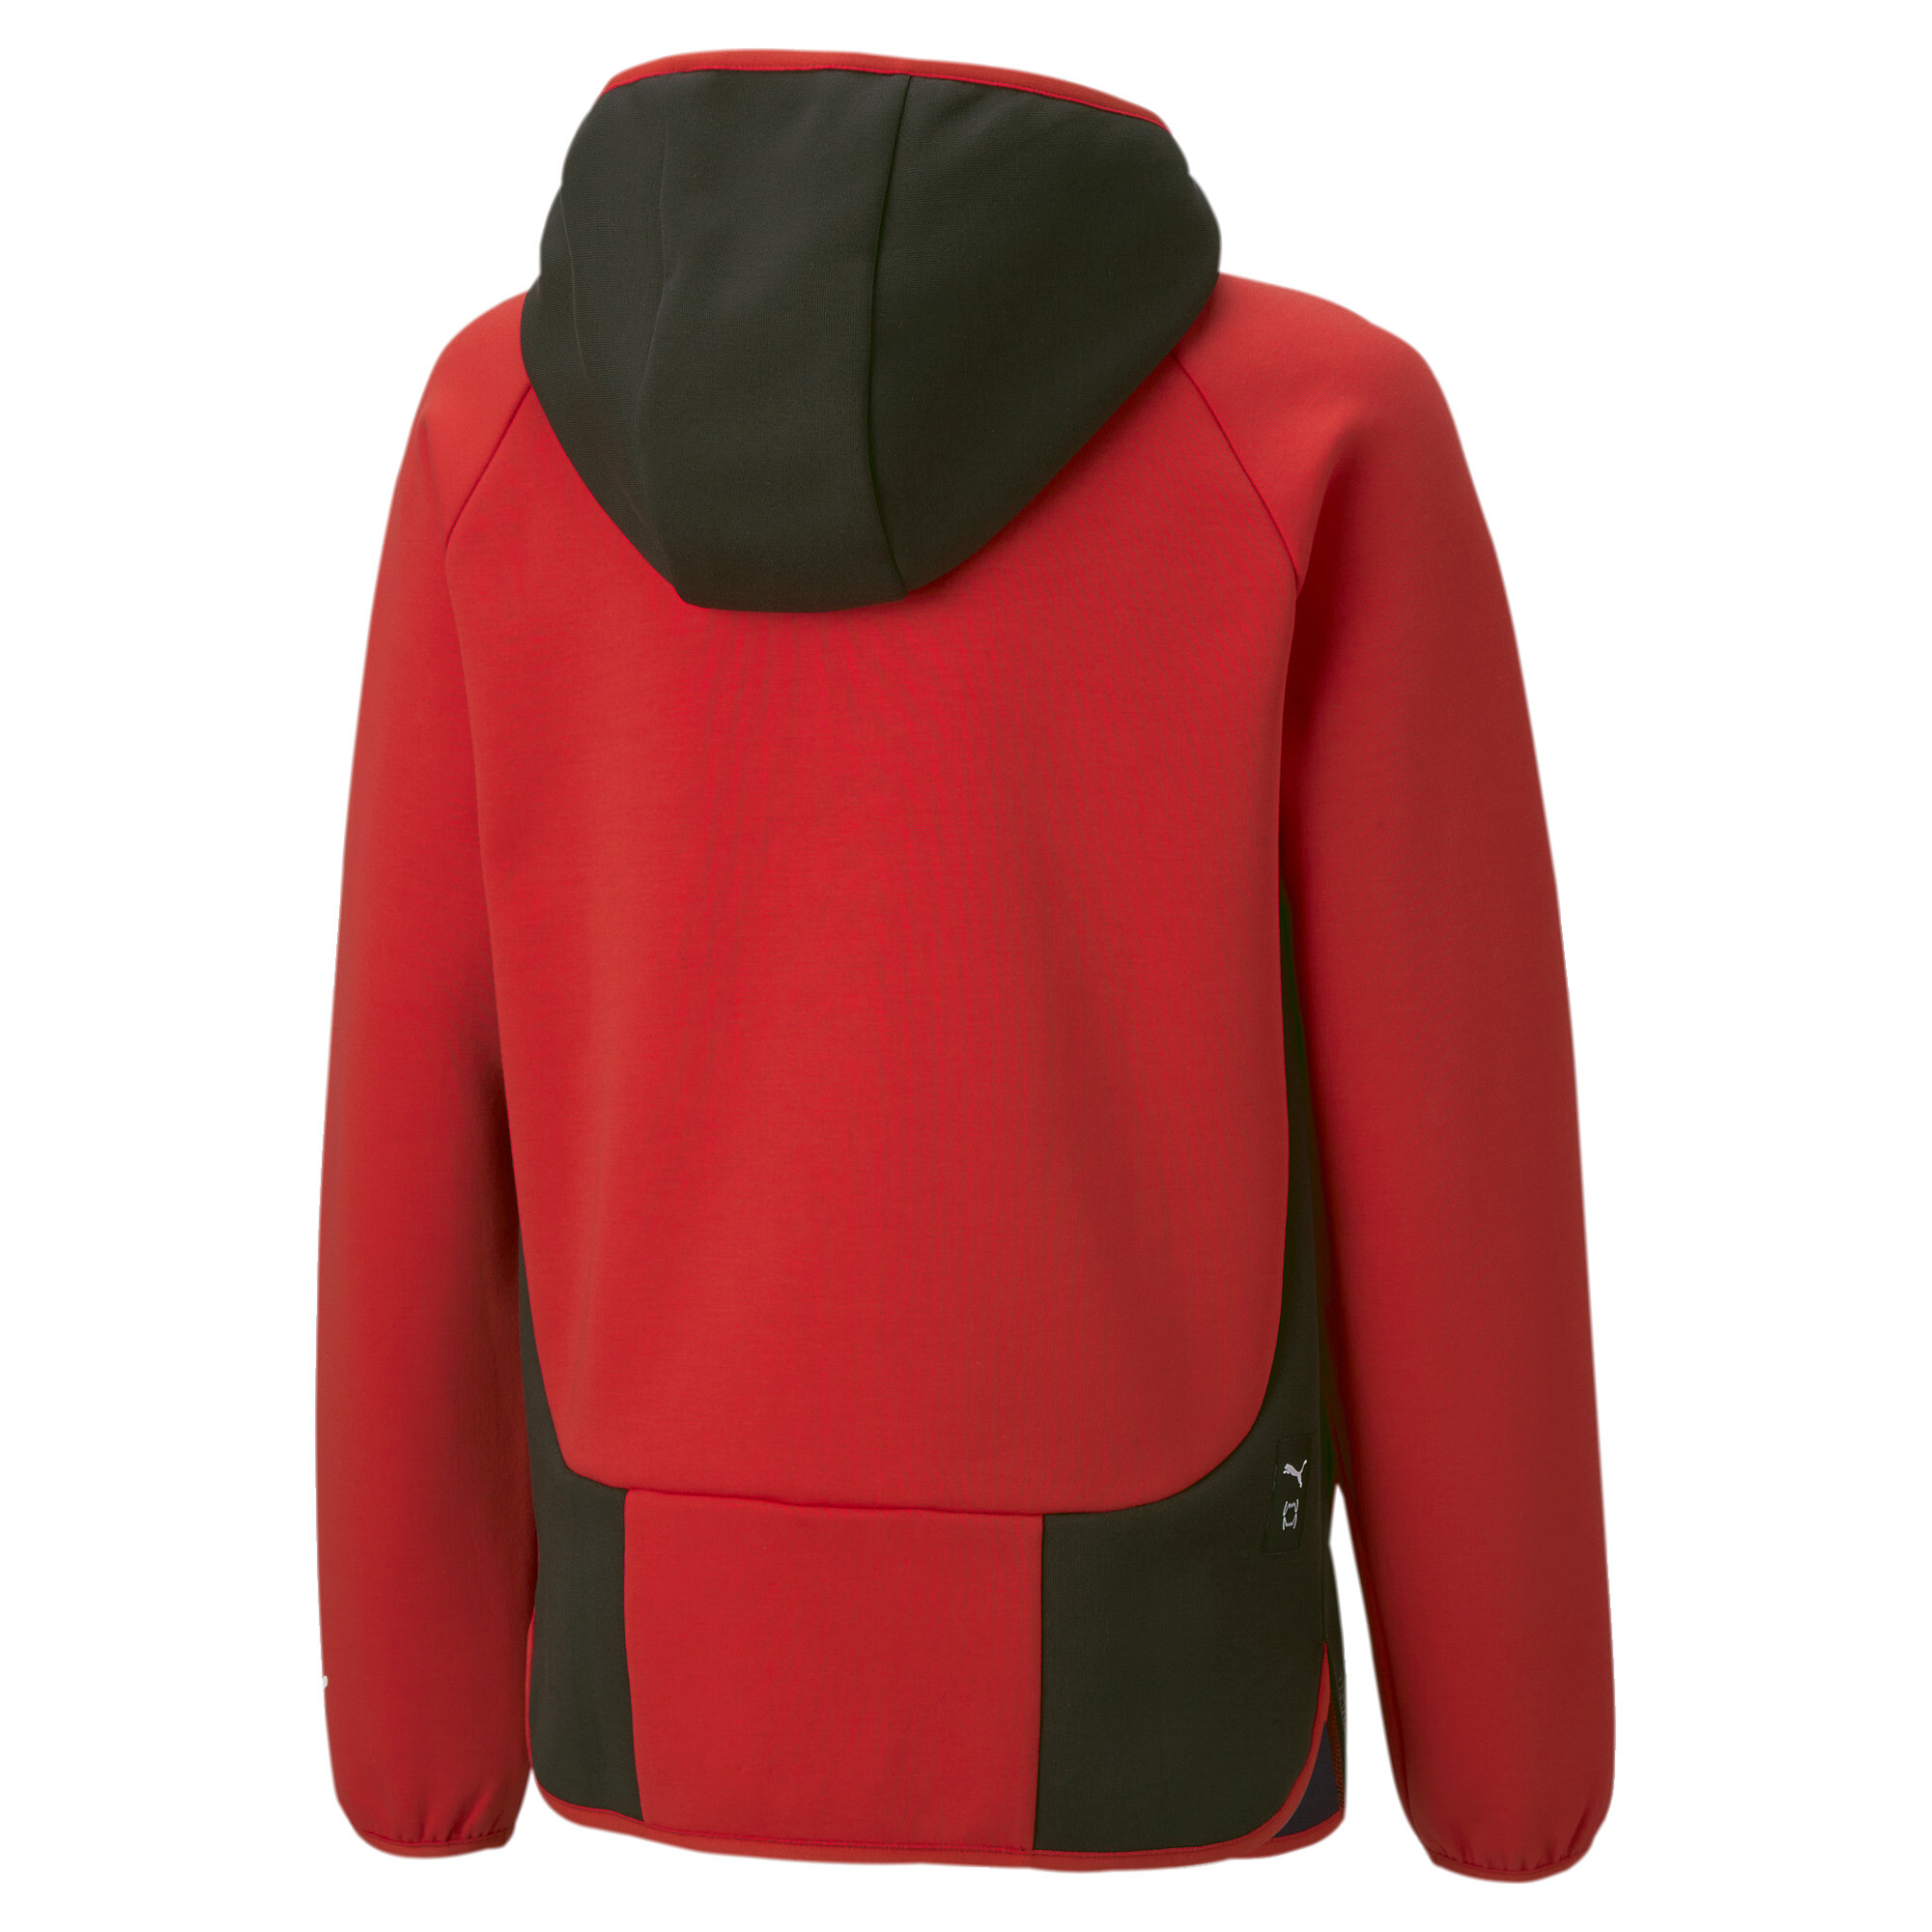 PUMA X MELO Dime Jacket In Red, Size 13-14 Youth